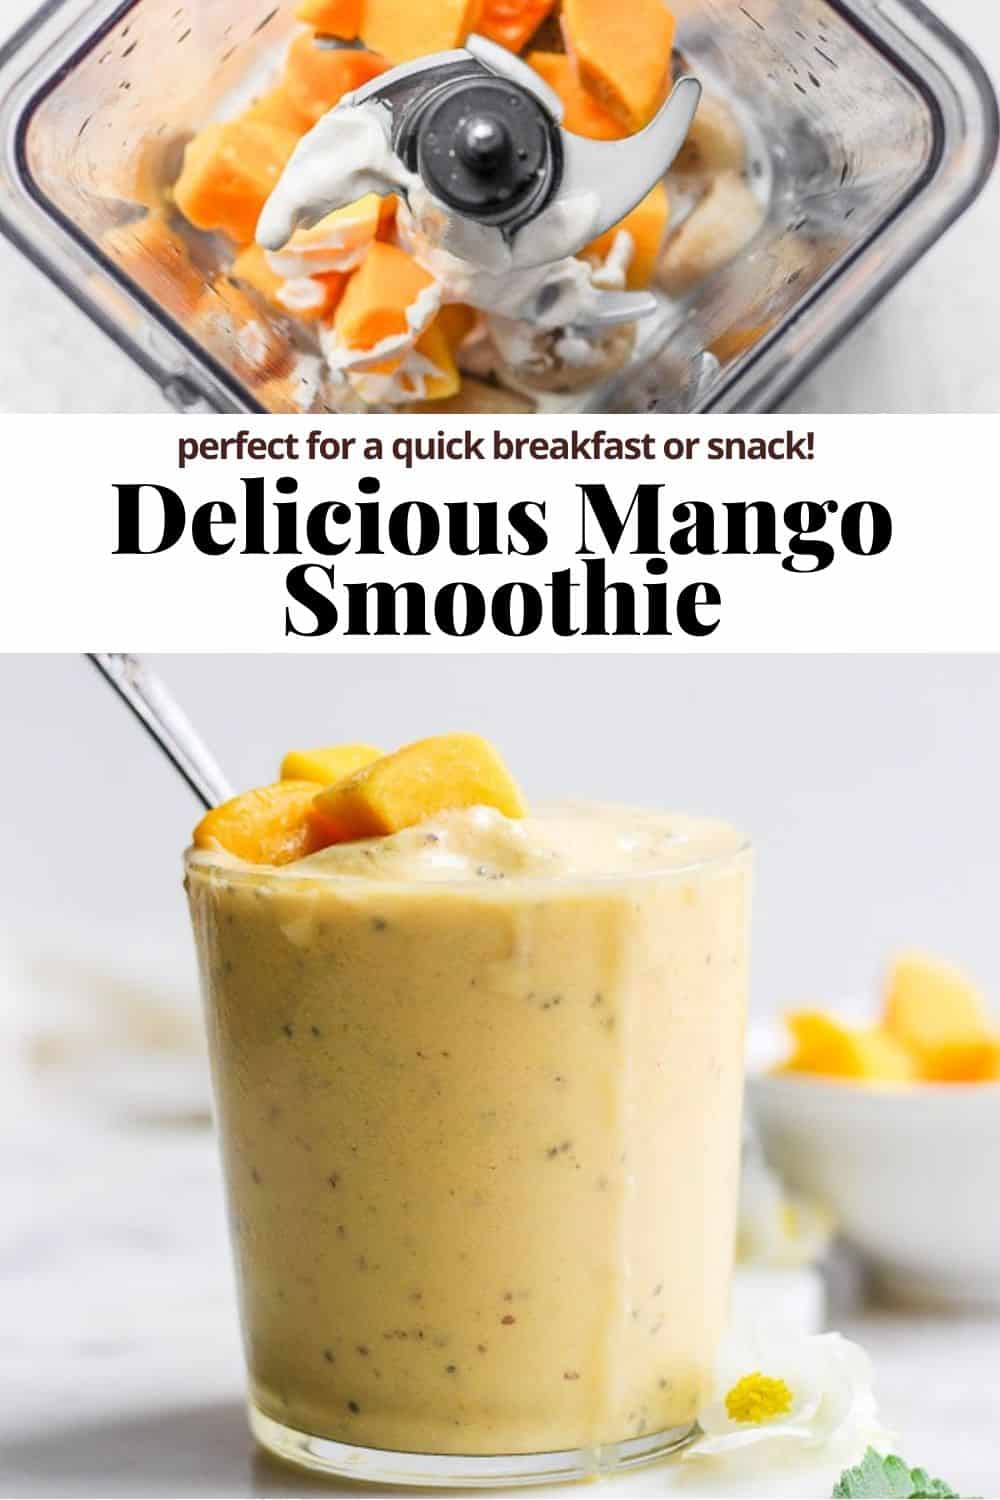 Pinterest image for the best mango smoothie.